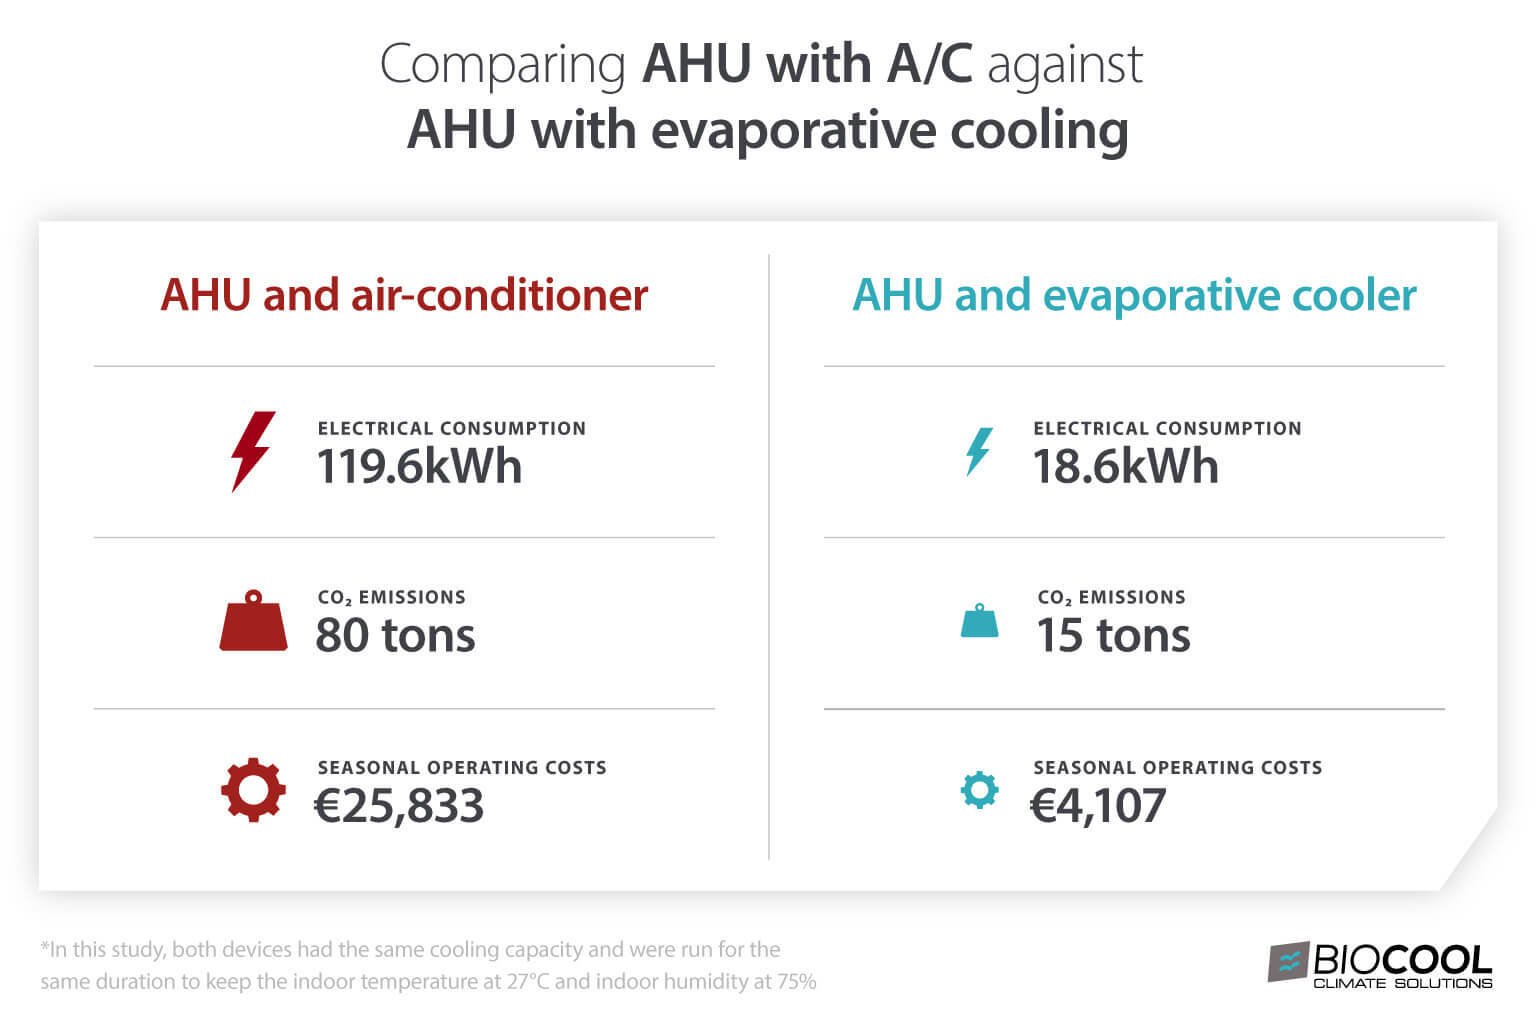 Energy savings of evaporative coolers vs air conditioning units - Infographic & statistics